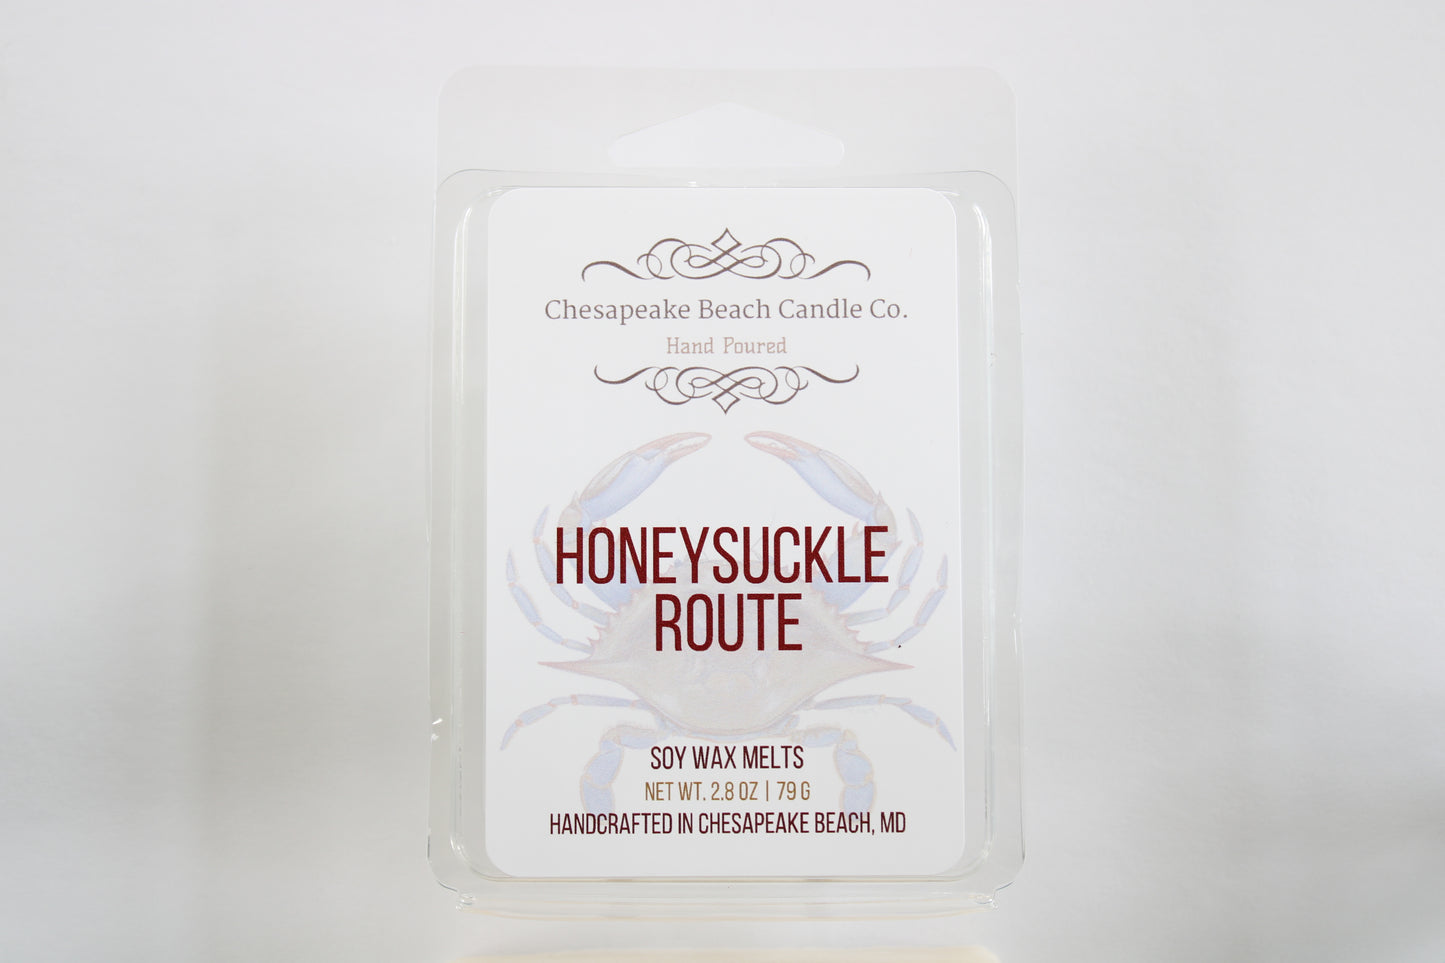 Honeysuckle Route Wax Melts